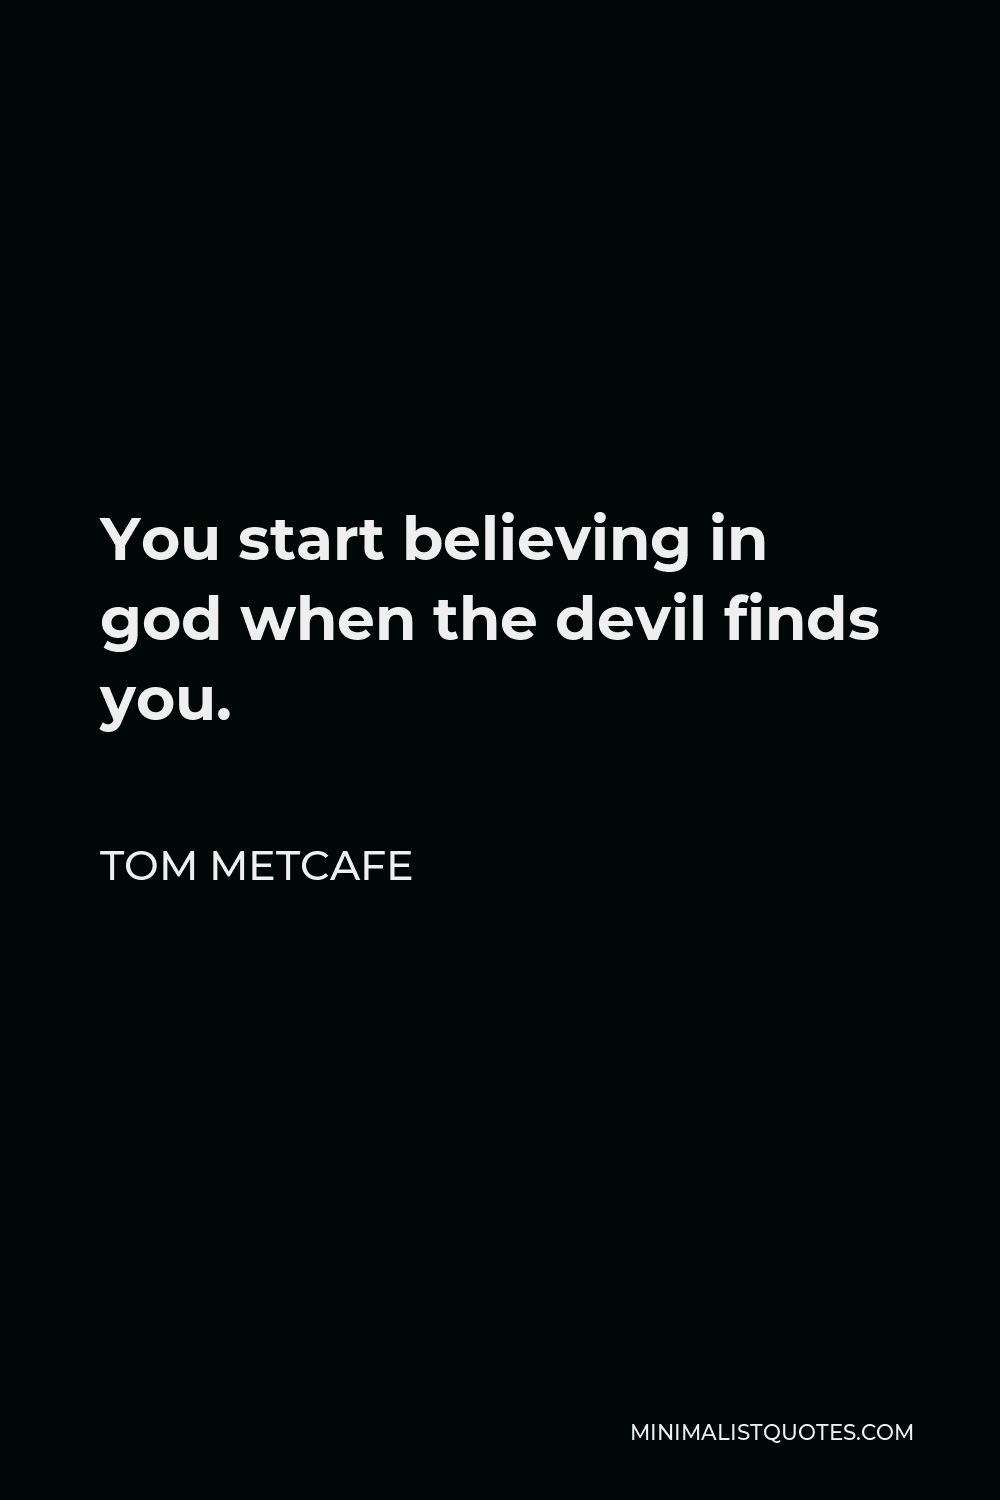 Tom Metcafe Quote - You start believing in god when the devil finds you.